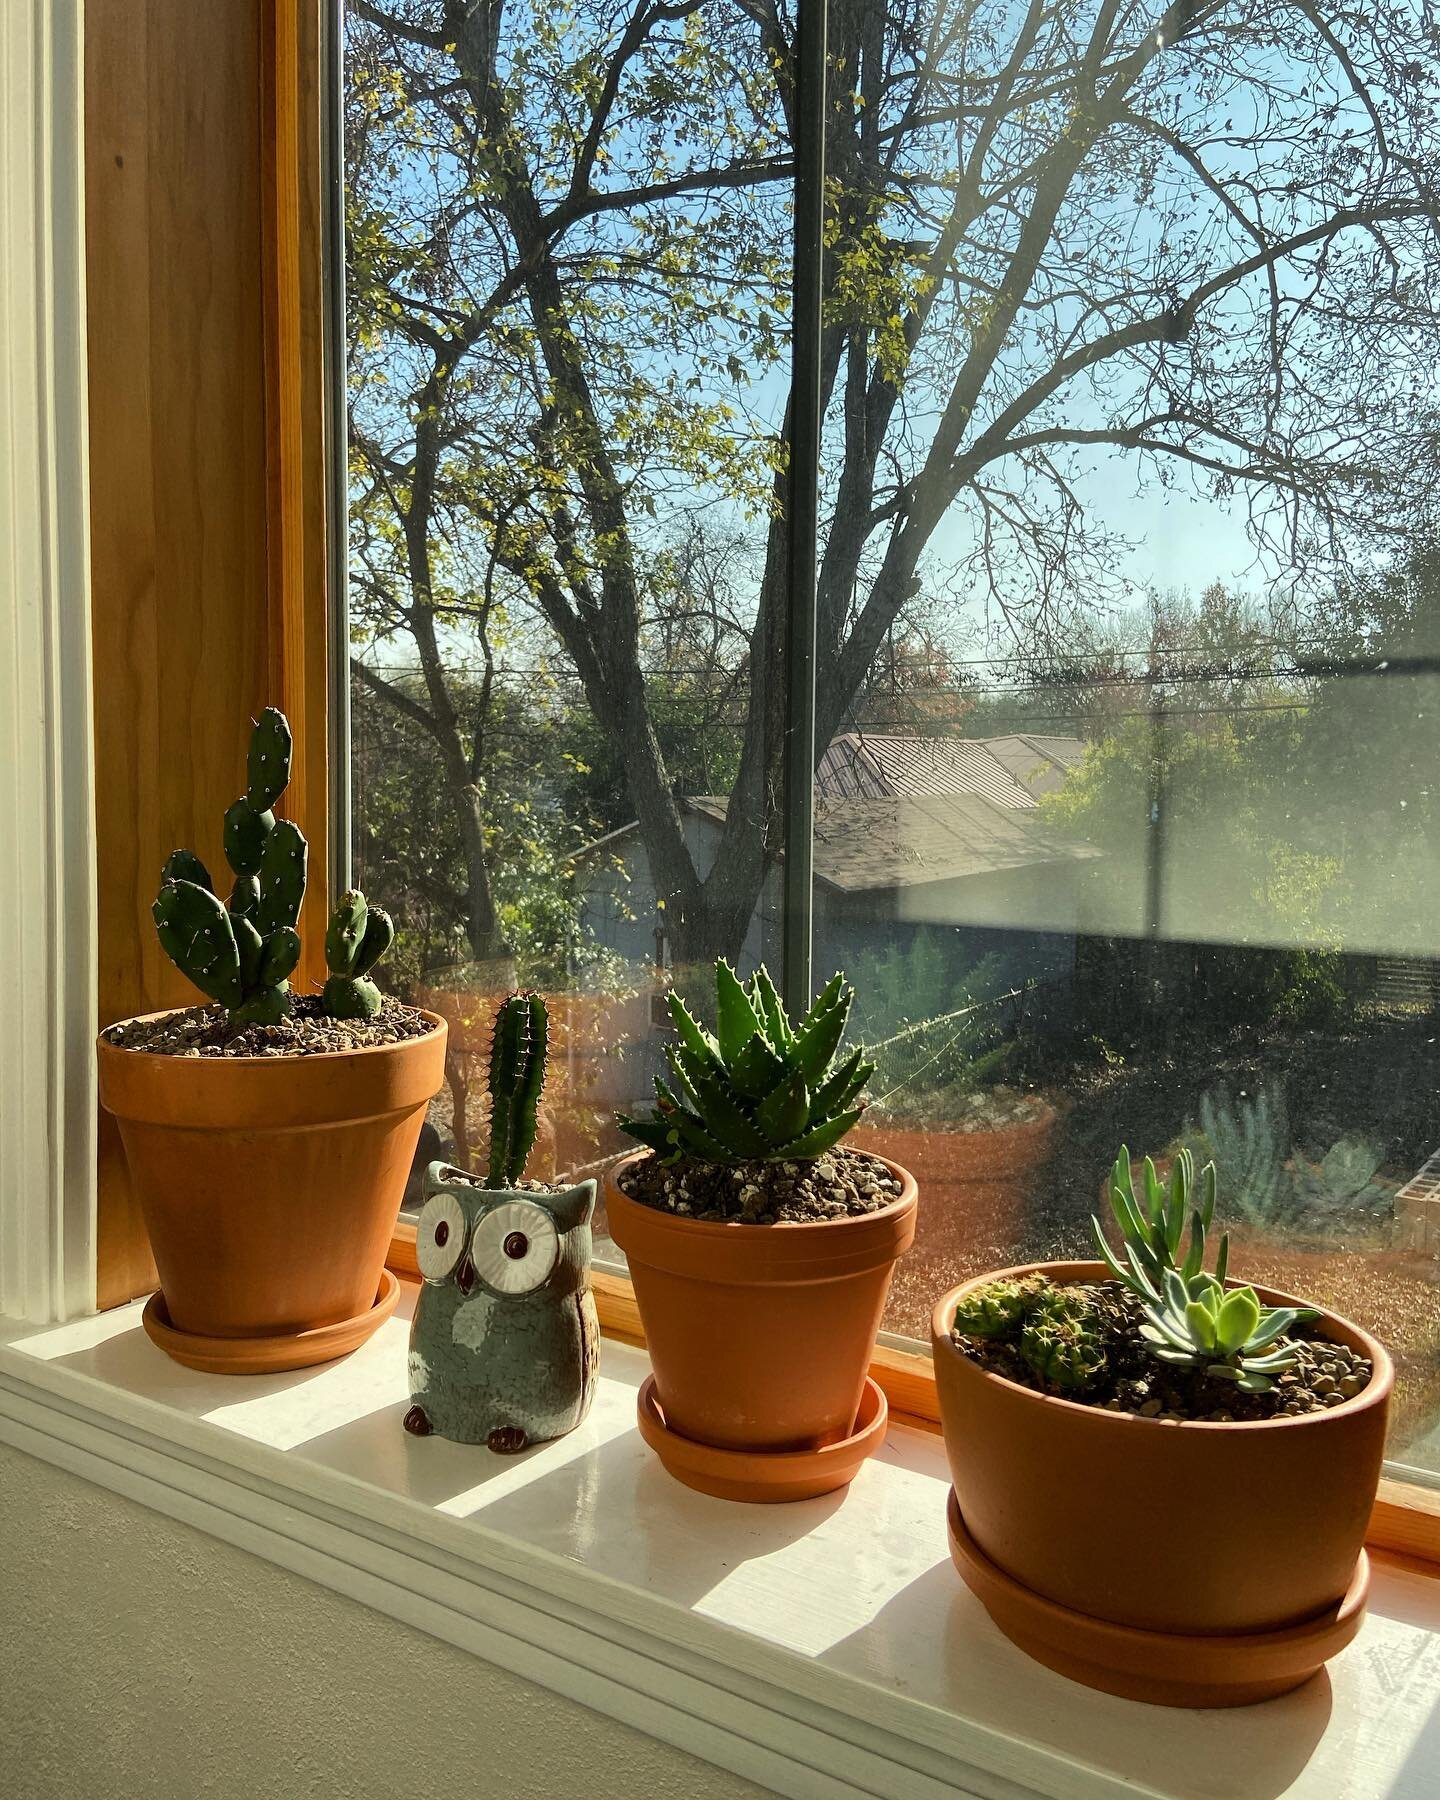 New plant tribe soaking it up